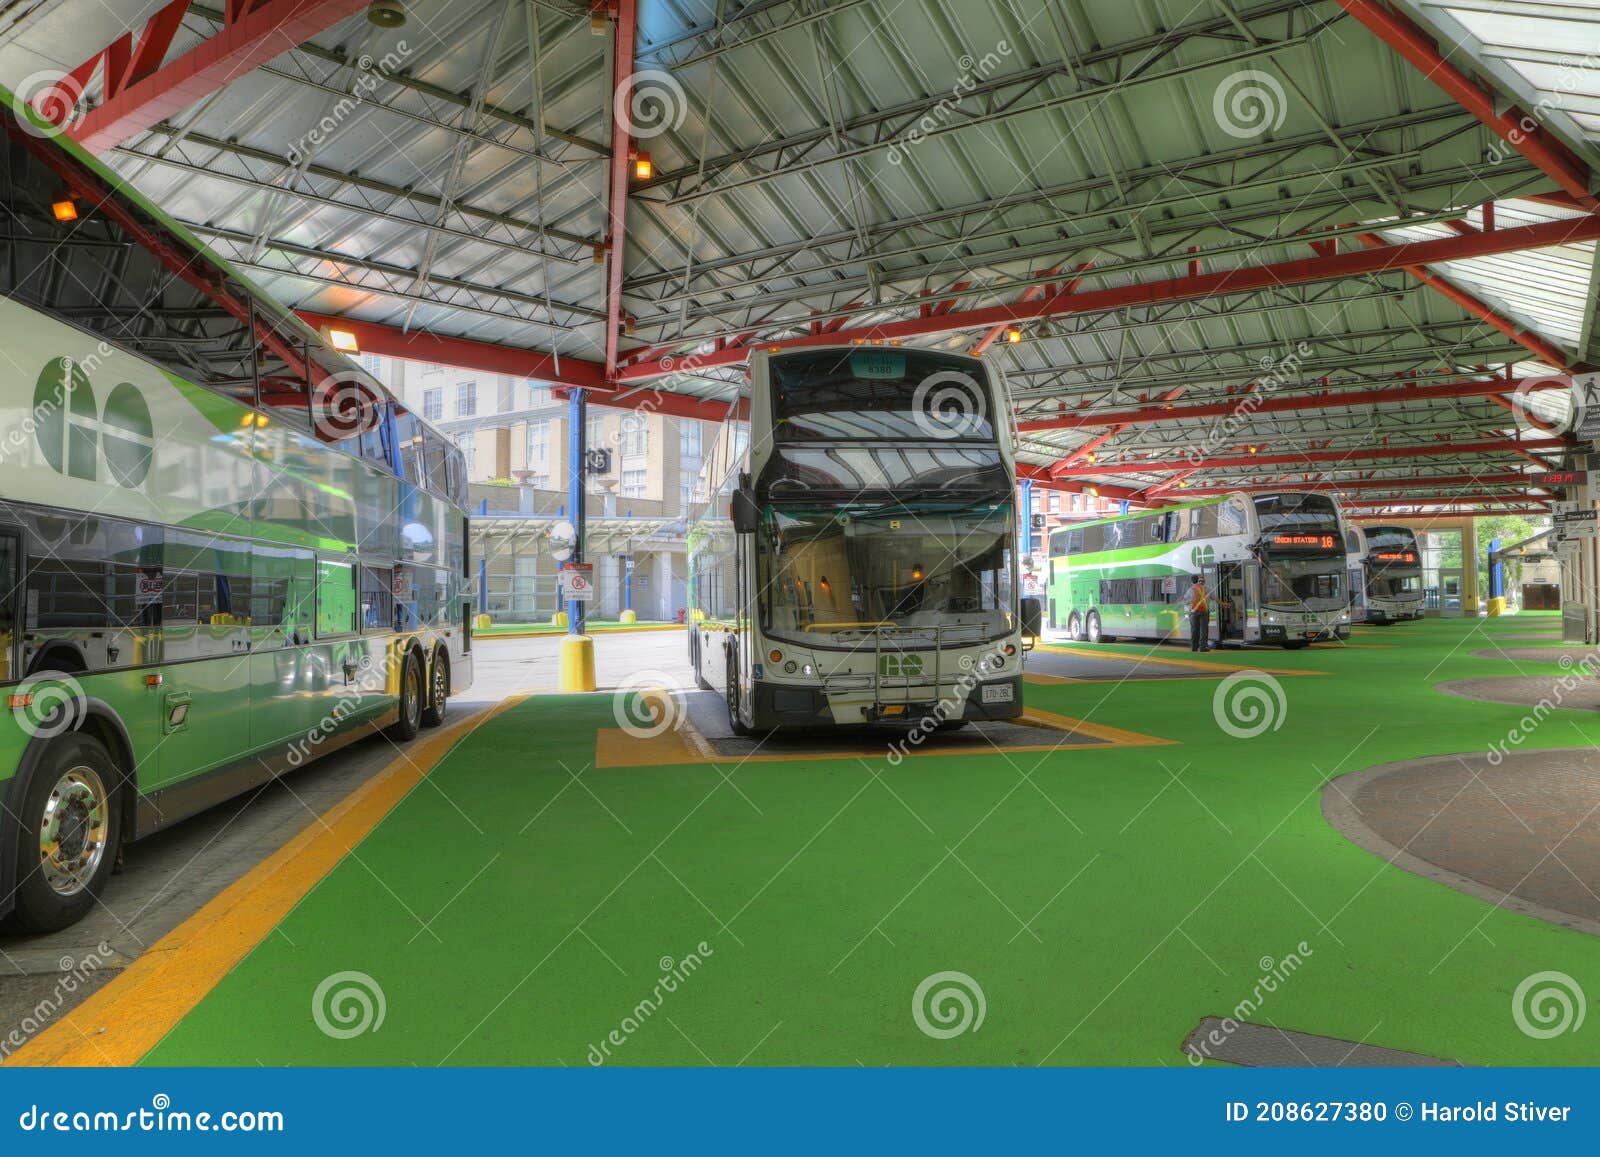 Go Buses at the Go Train Station Editorial Image - Image of ride ...